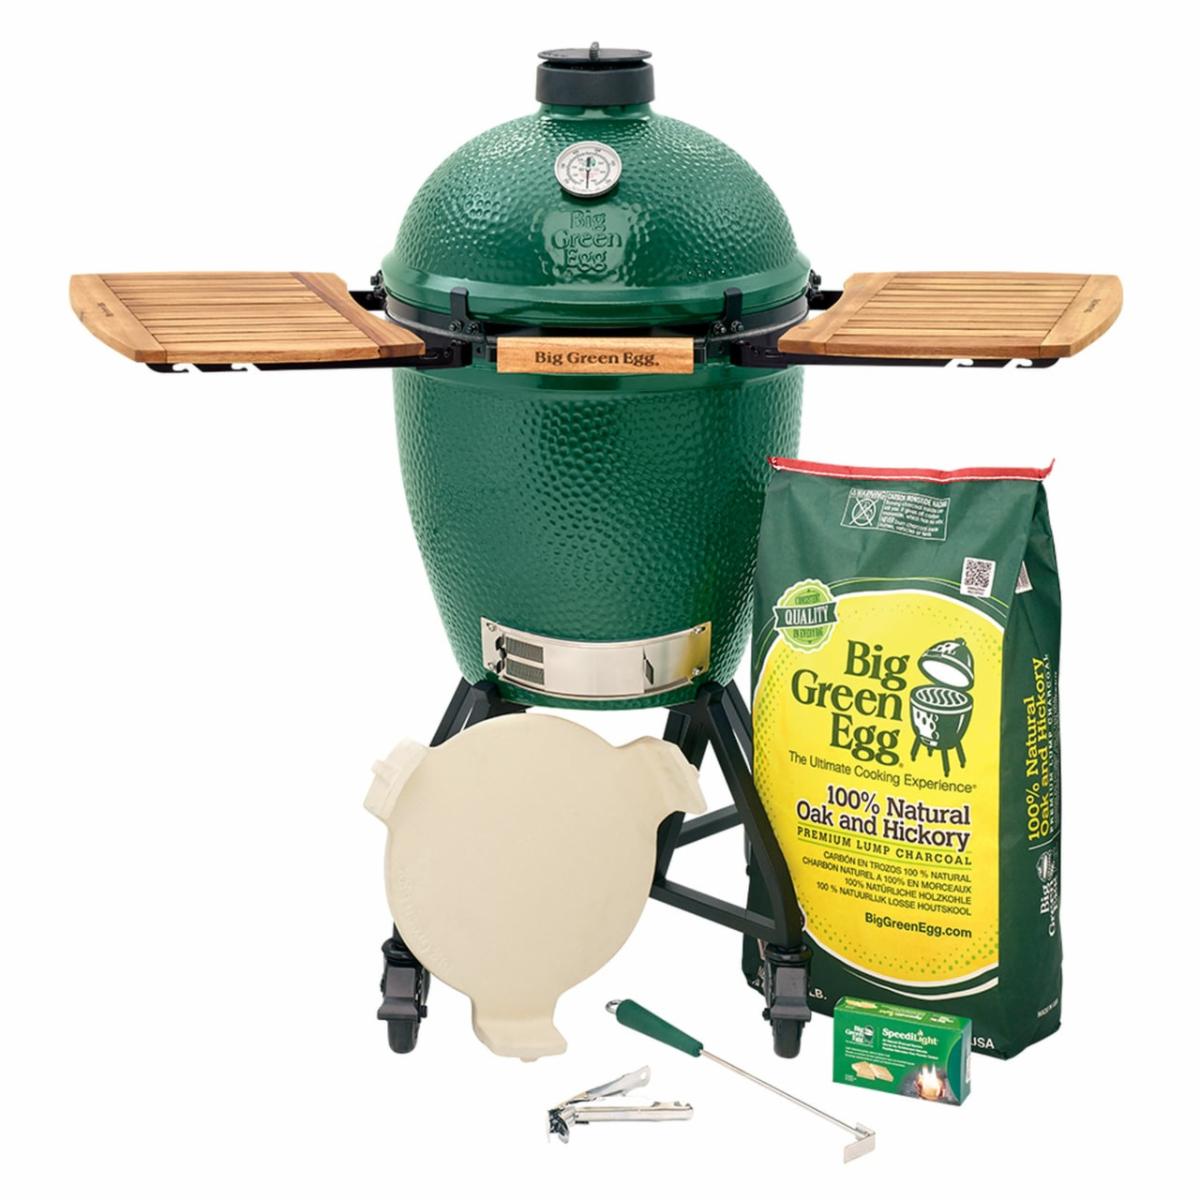 neus Productiviteit President Small Big Green Egg with Nest Bundle - Mad Hatter Online Store